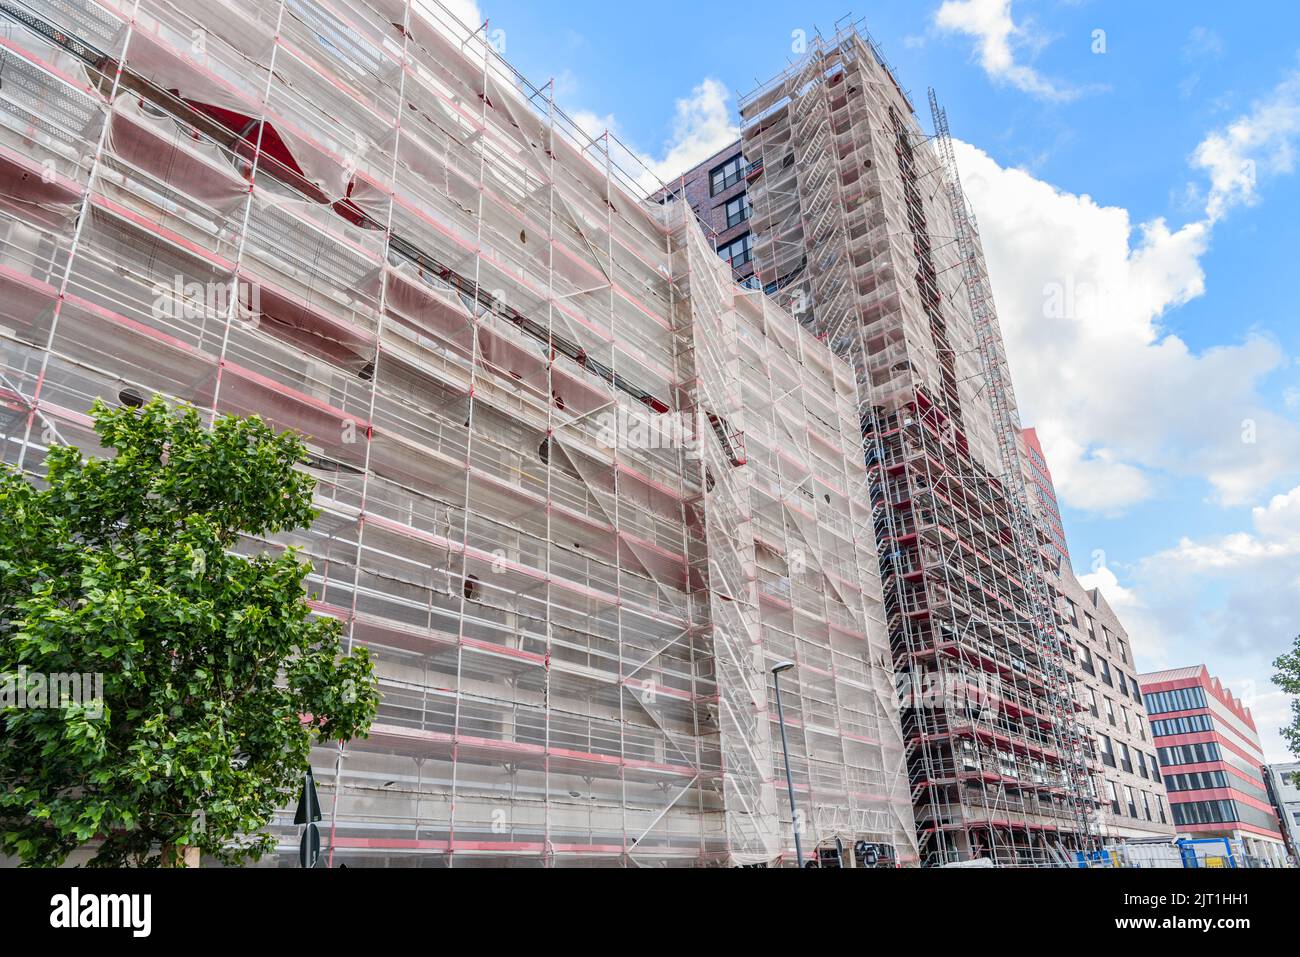 Low angle view of a high rise building in construction wrapped with scaffolding in a city centre on a clear summer day Stock Photo